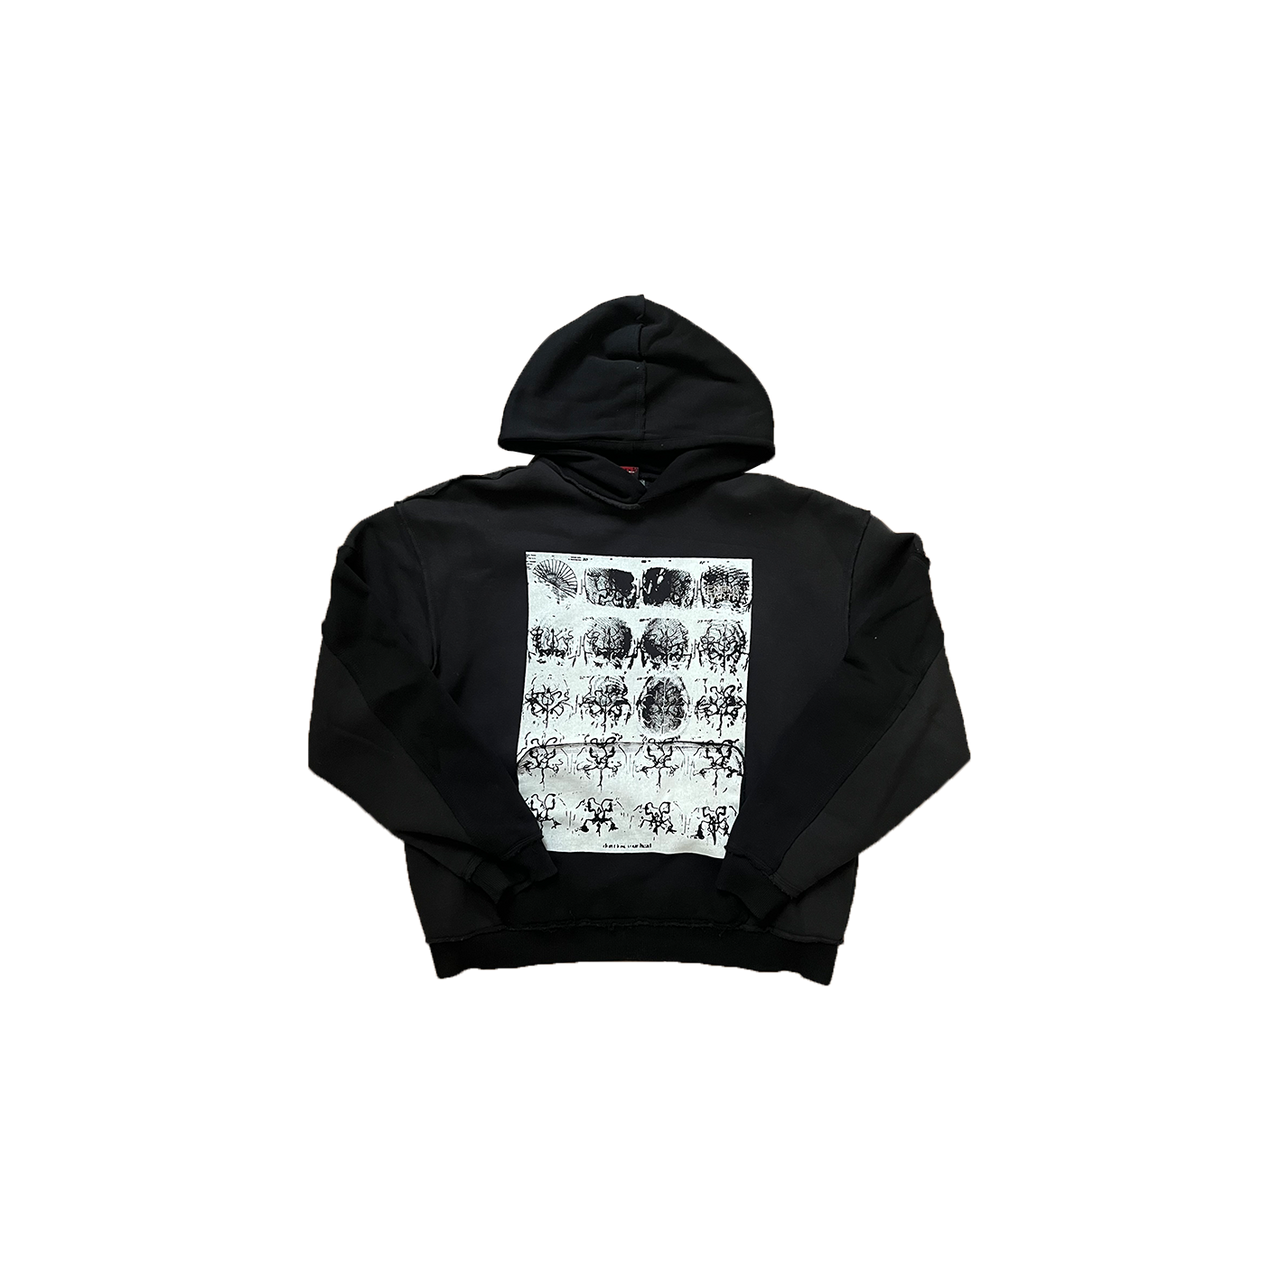 Don't Lose Your Head Hoodie "Stamp"